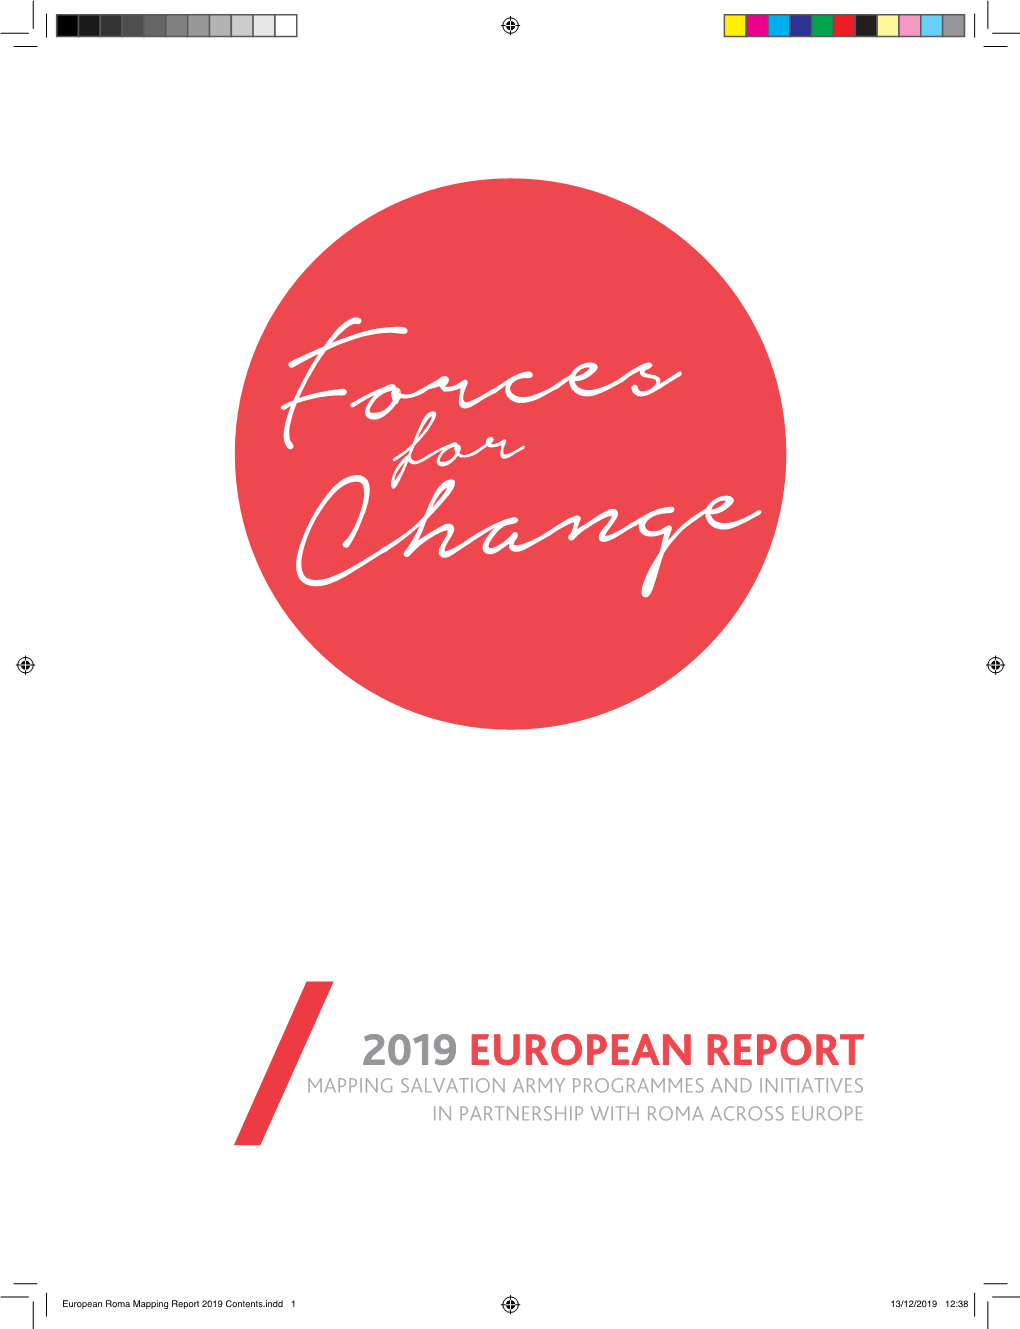 European Roma Mapping Report 2019 Contents.Indd 1 13/12/2019 12:38 CONTENTS Foreword by Major Mike Stannett 3 European Affairs Officer